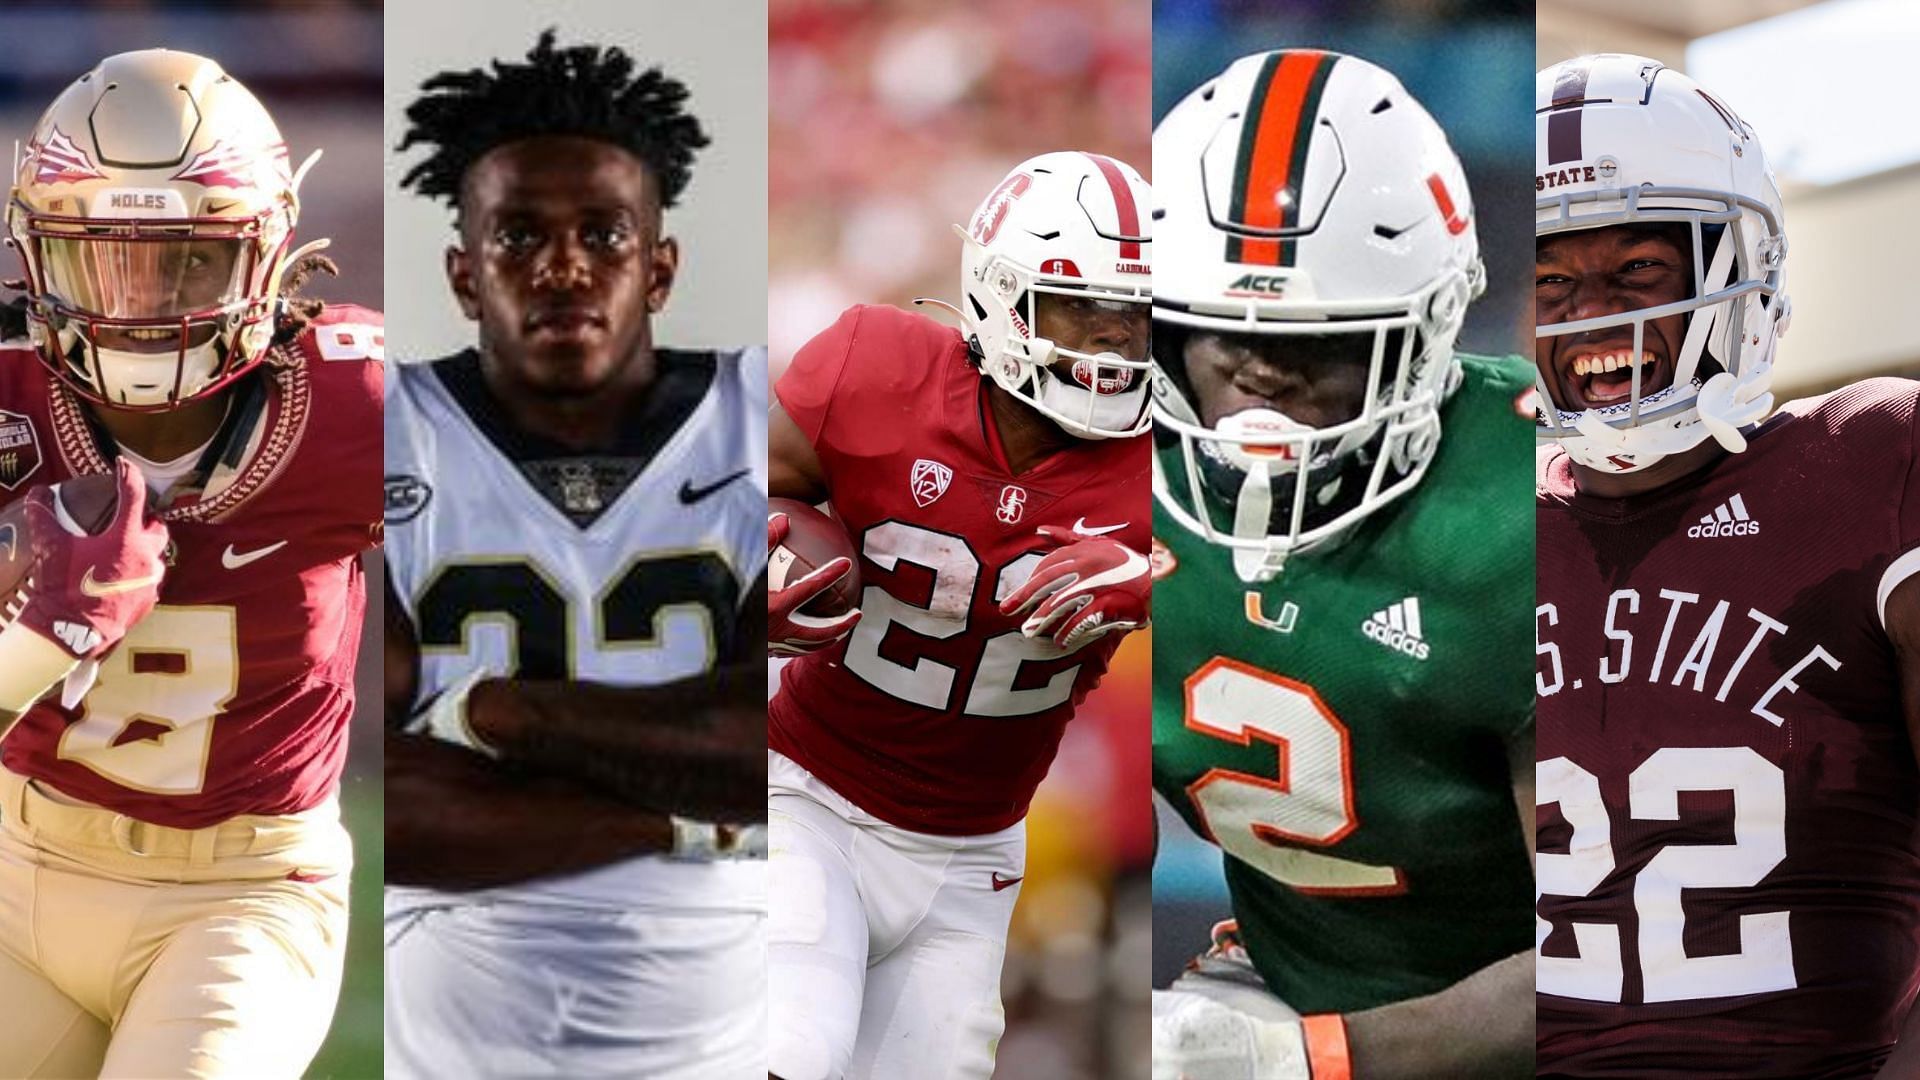 These are some of the top RBs in the transfer portal